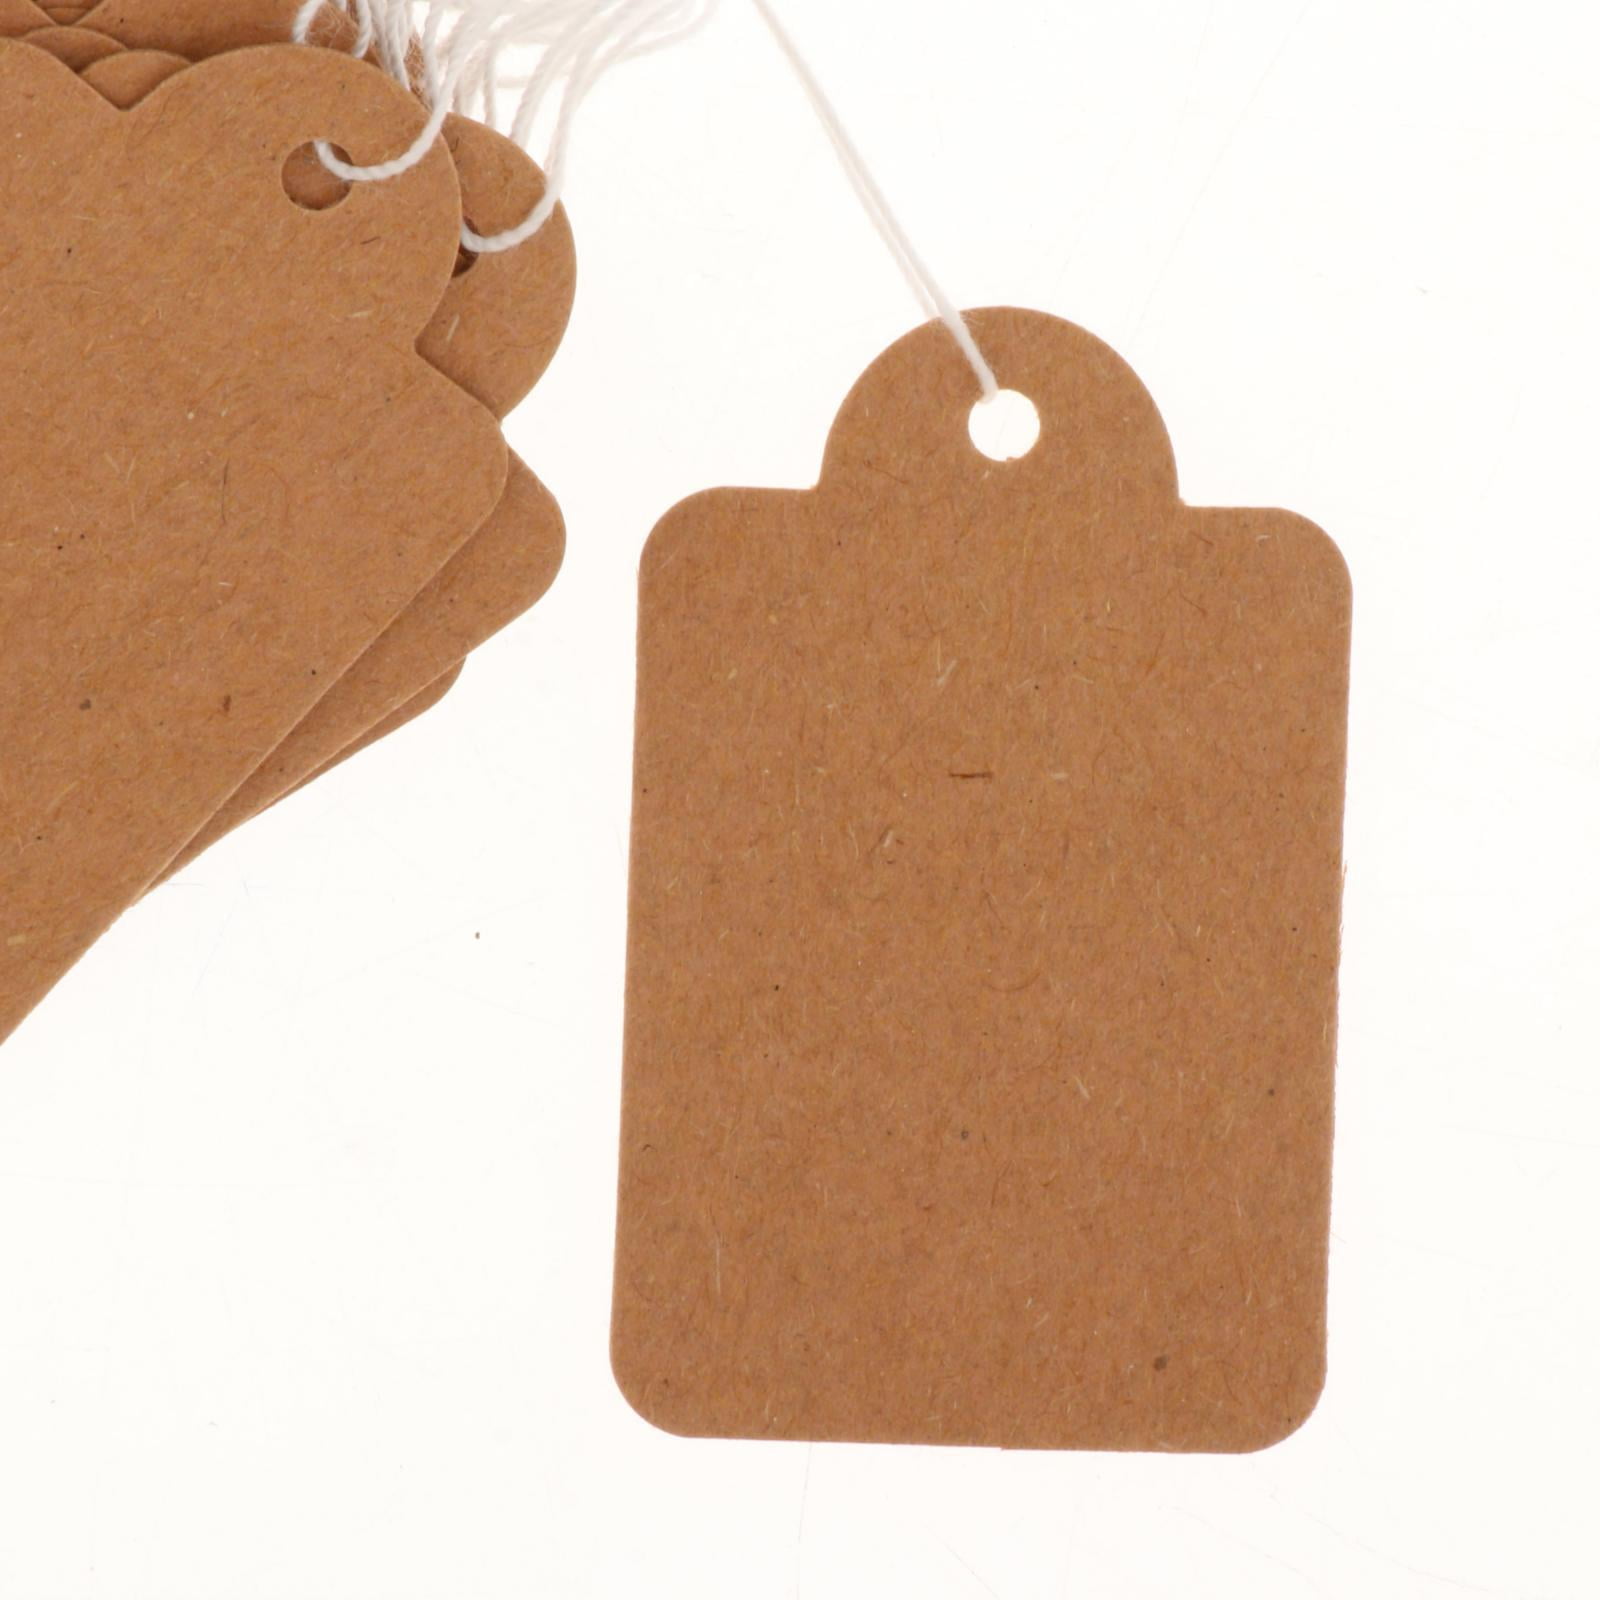 jijAcraft 500Pcs Price Tags with String Attached, Brown Clothing Tags for  Business Selling, Small Blank Labeling Tags, Retail Strung Marking Tags